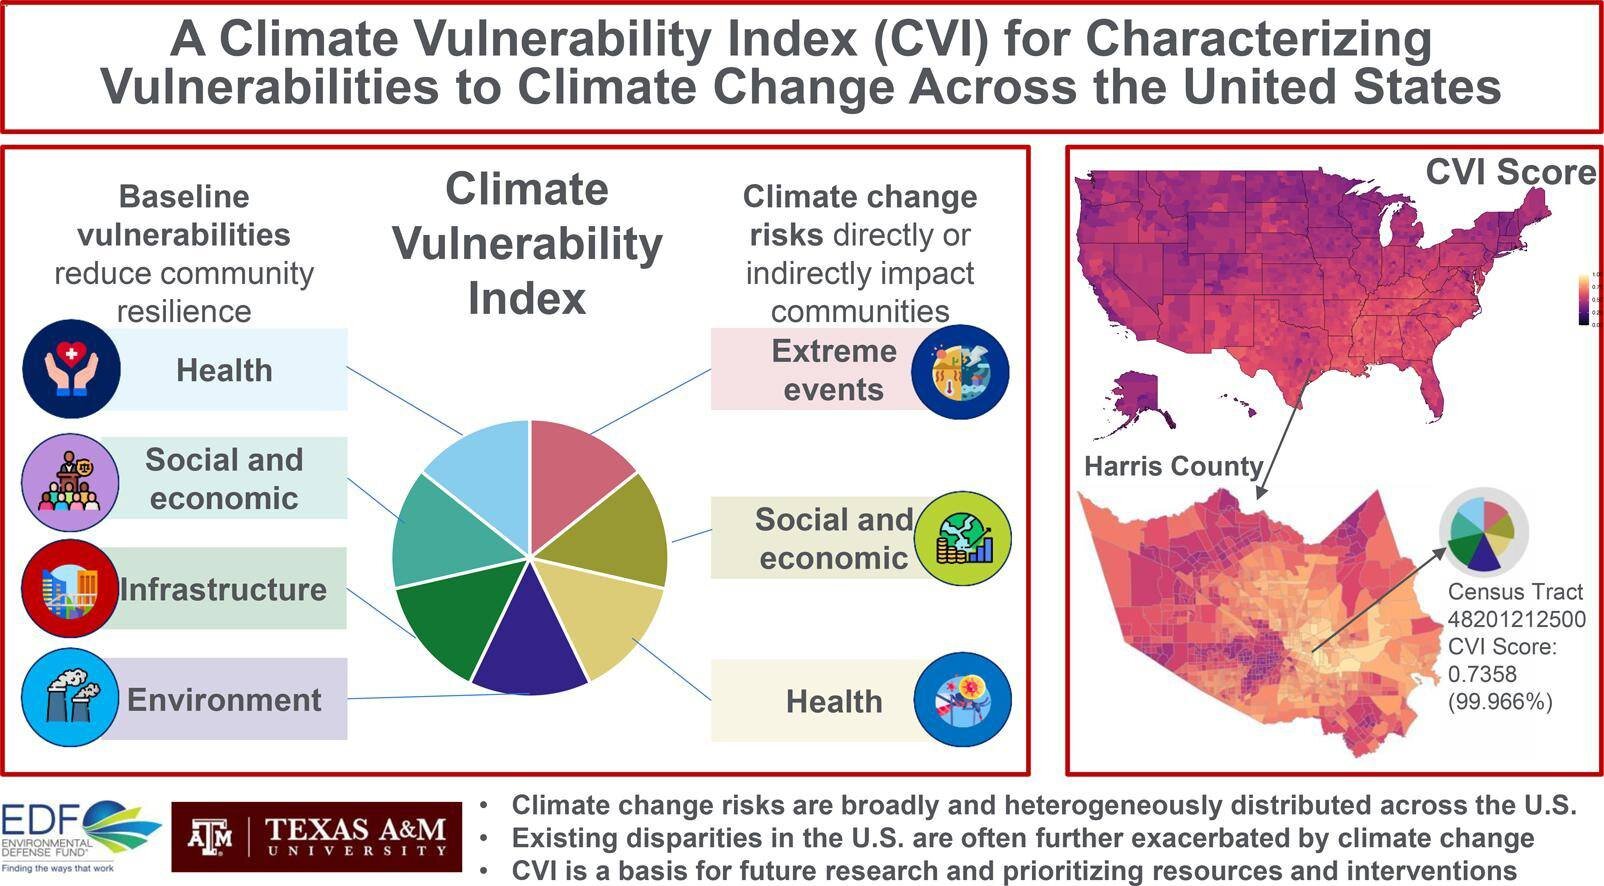 'Climate vulnerability index' shows where action, resources are needed to address climate change threats